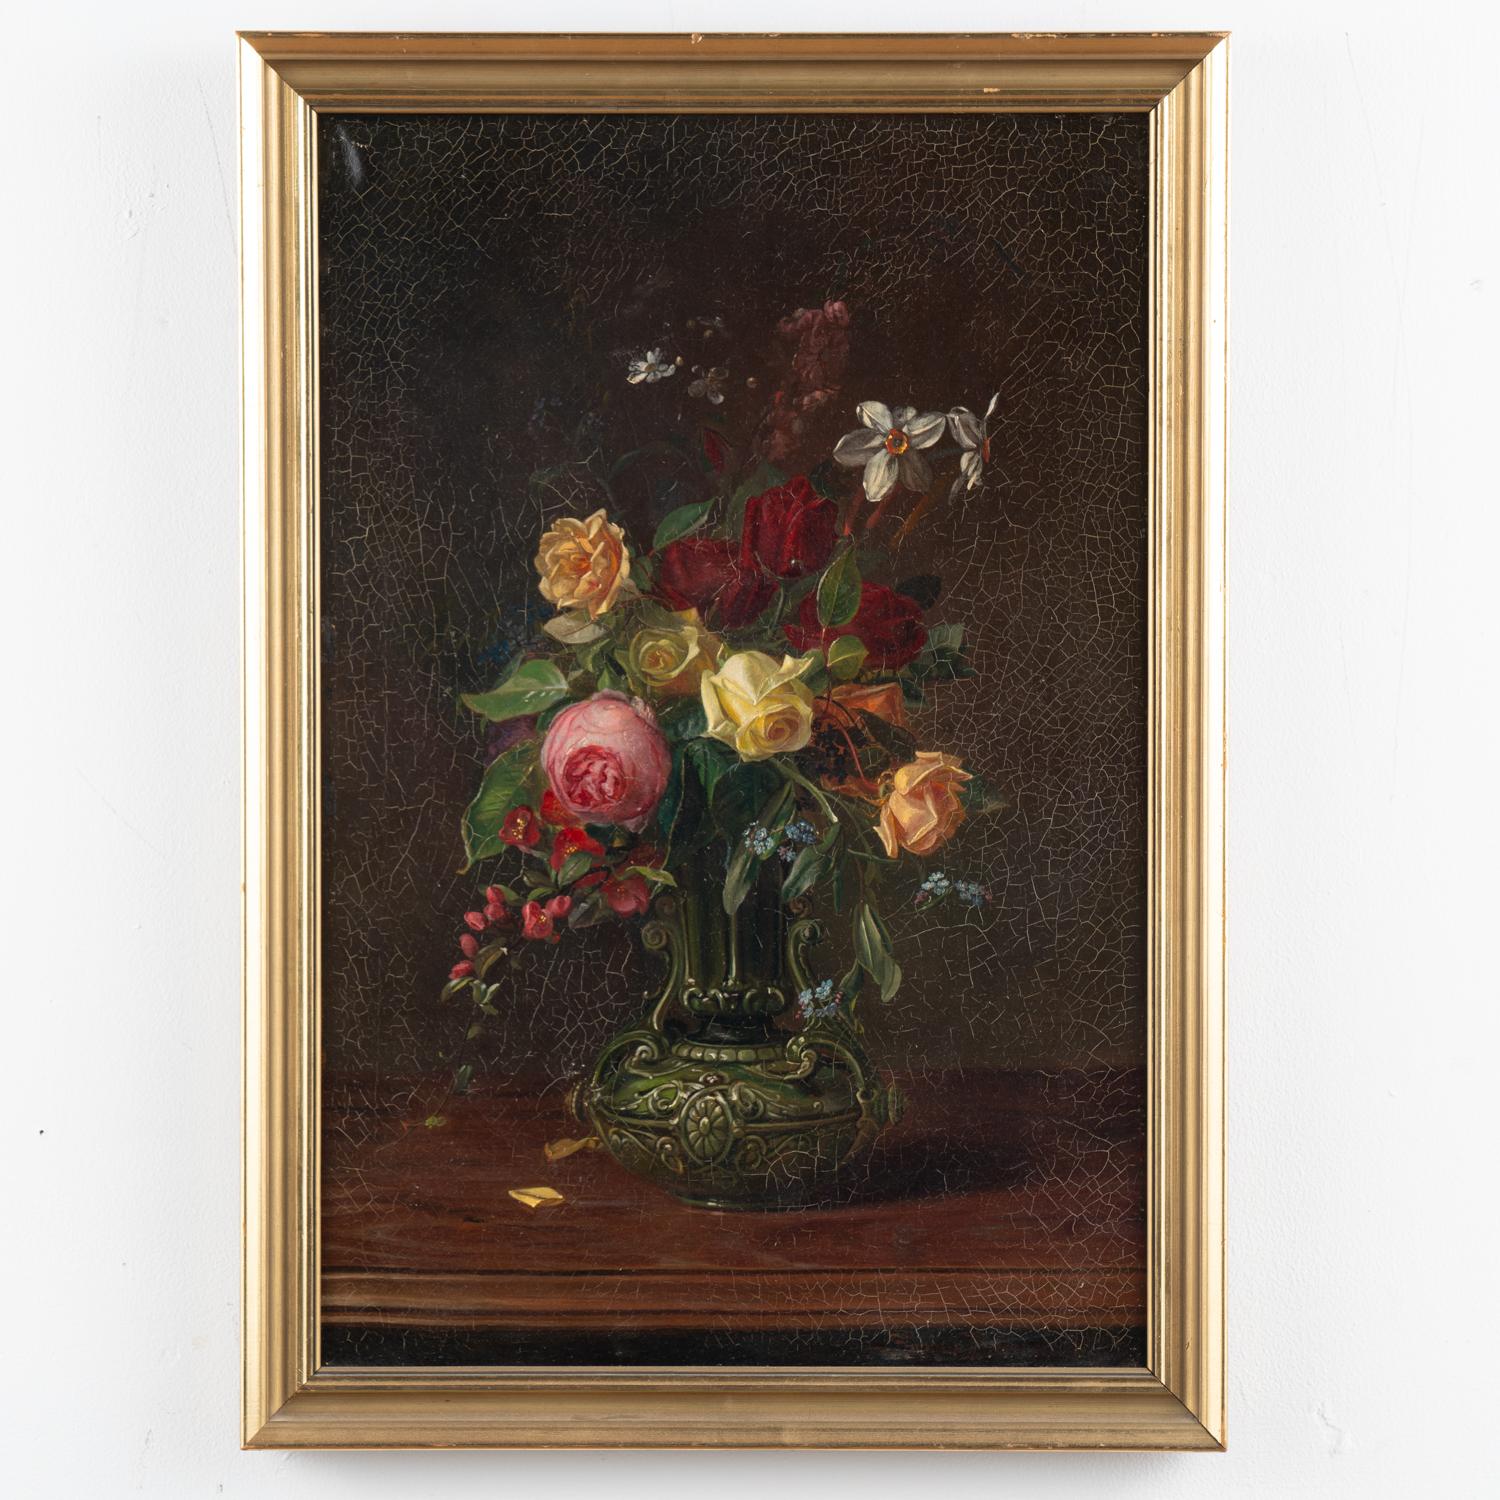 Original oil on canvas still life with bouquet of roses and other flowers in tall green vase. 
Signed and dated Sophus Petersen, 1885.
Sold in original vintage condition, craquelure throughout, some retouches and minor peelings. Canvas may benefit